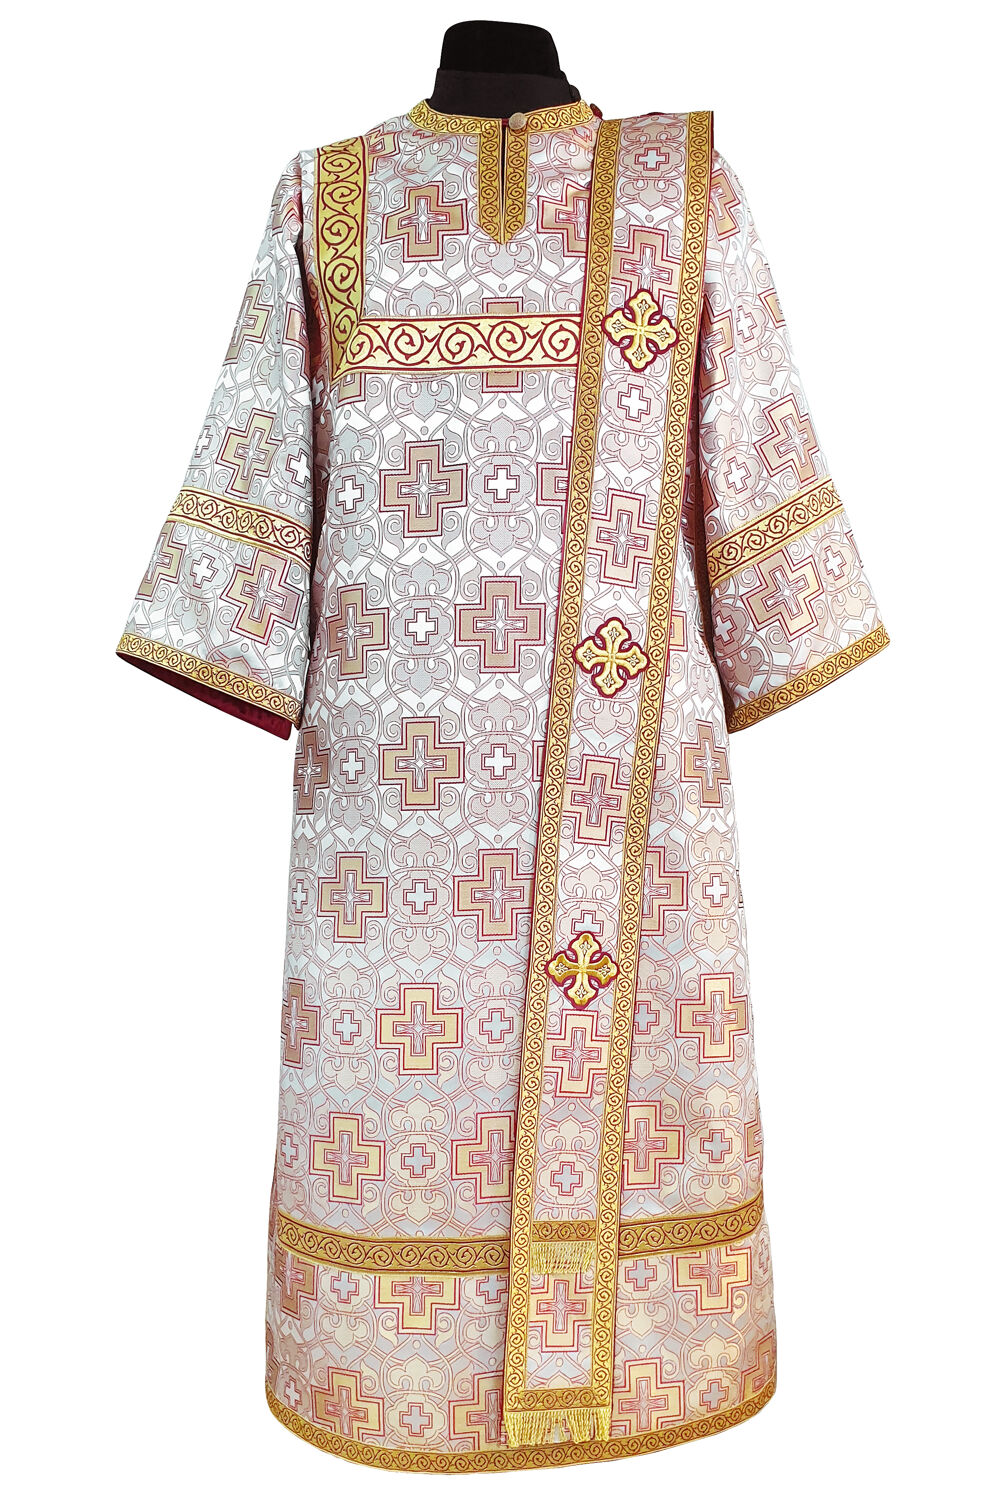 Vestment of Deacon white with dark-red crosses